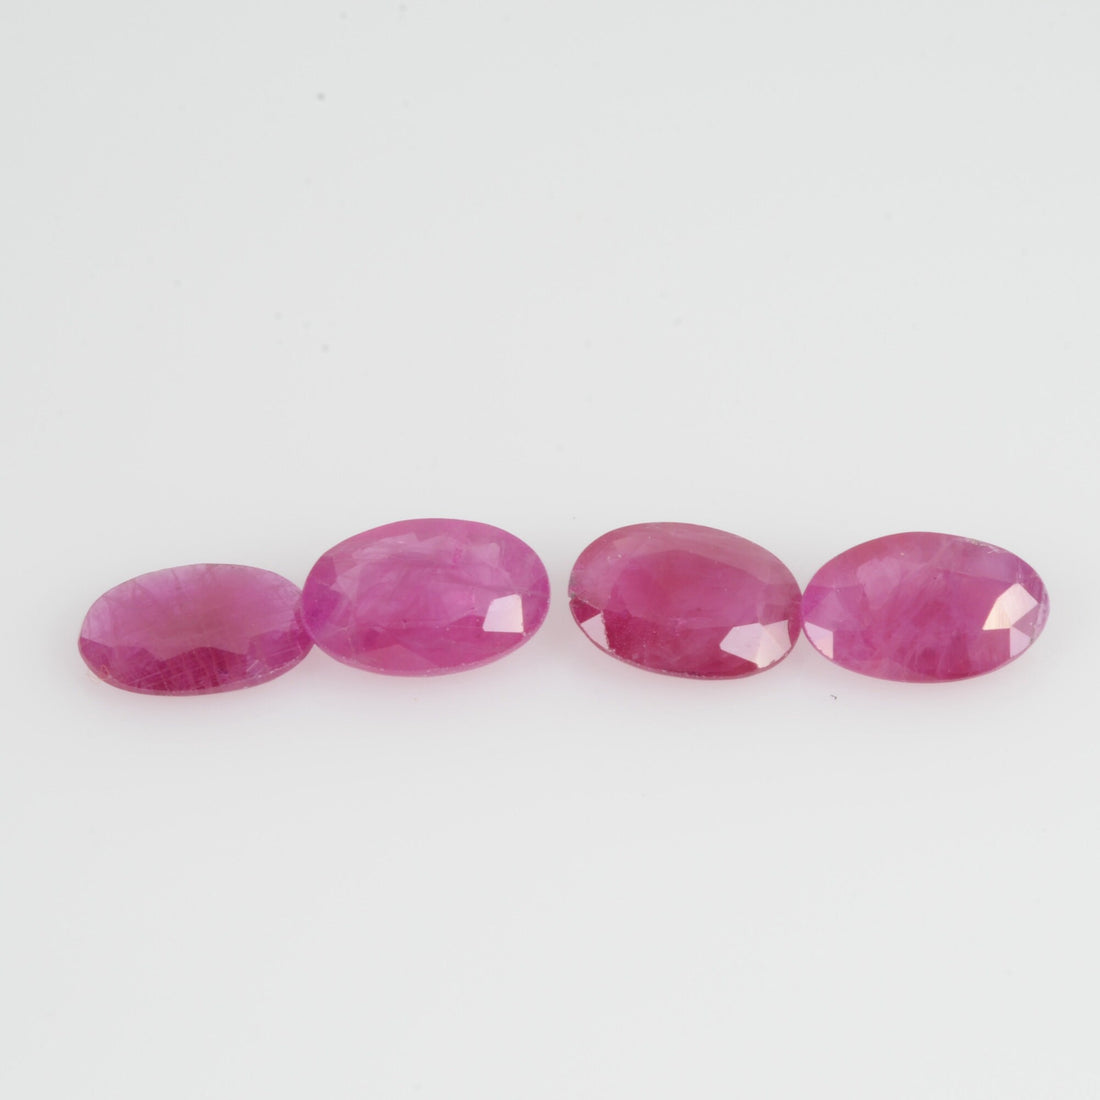 6x4 MM Natural Ruby Loose Gemstone Oval Cut